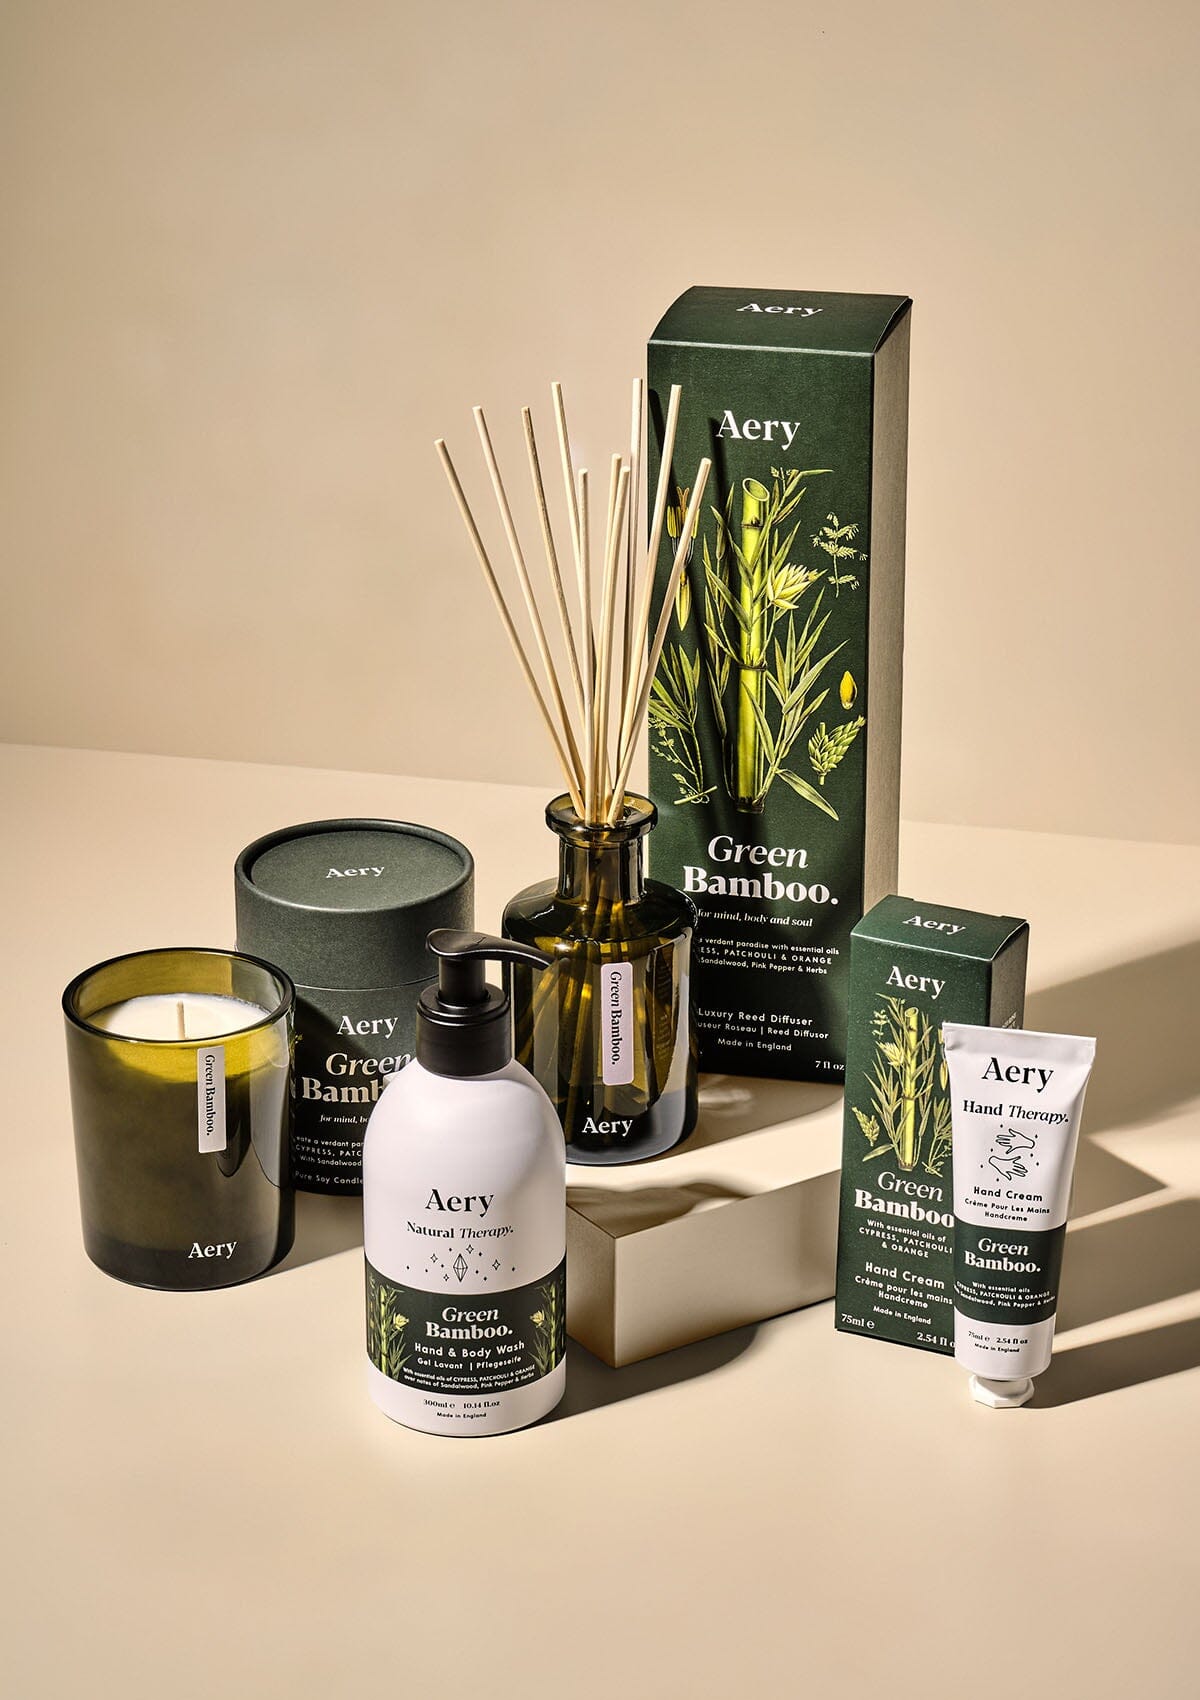 Green Bamboo diffuser, candle, hand cream and lotion by Aery displayed on cream background 